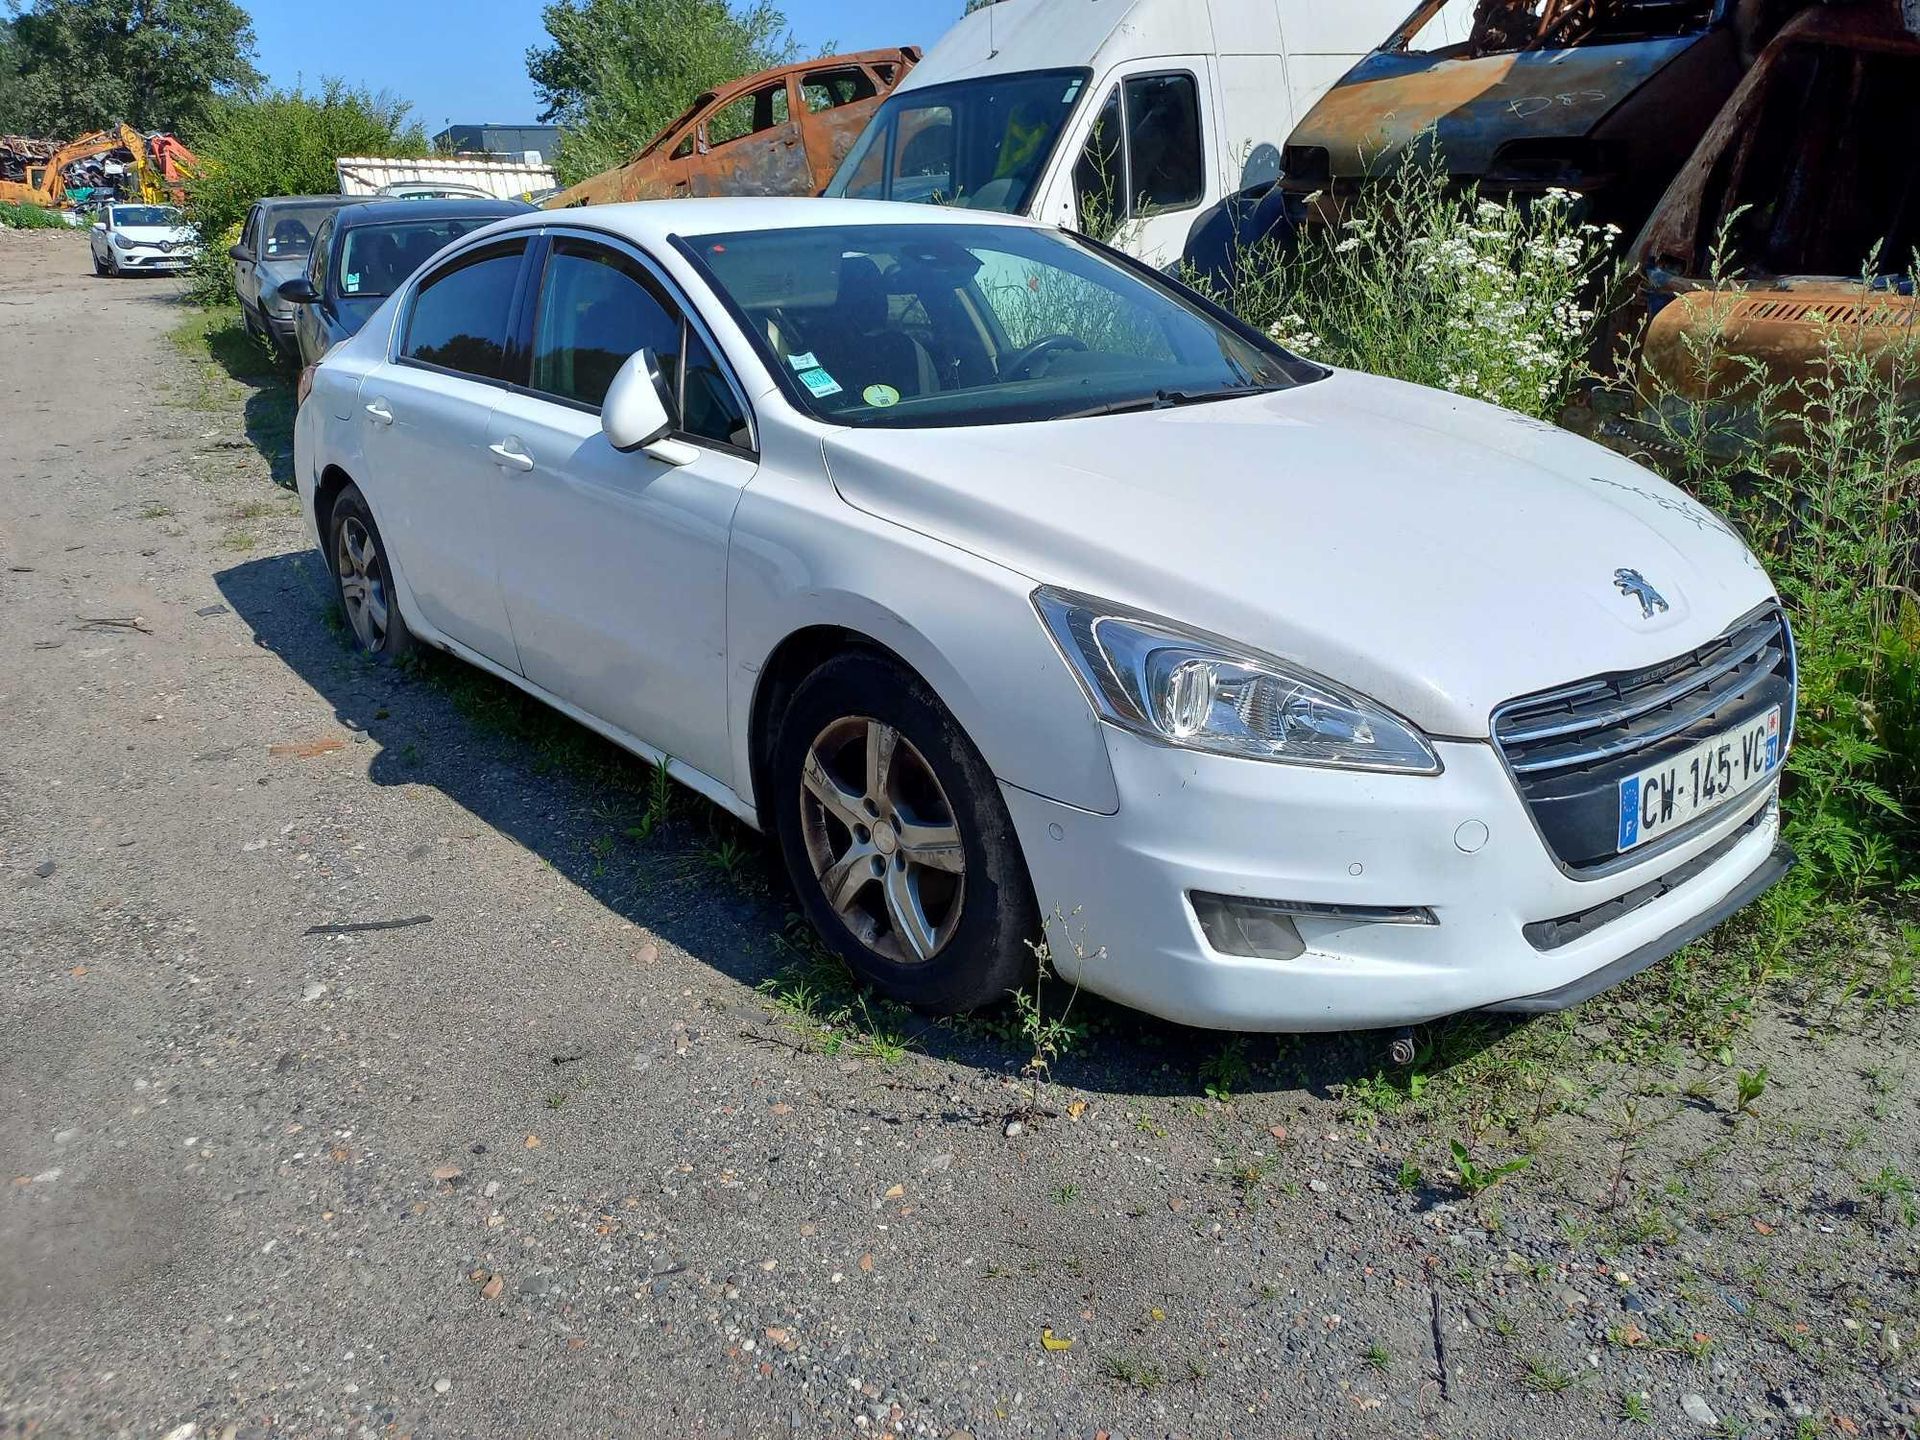 Null [RP] Reserved for automotive professionals.
PEUGEOT 508 1.6 e-Hdi 115, Dies&hellip;